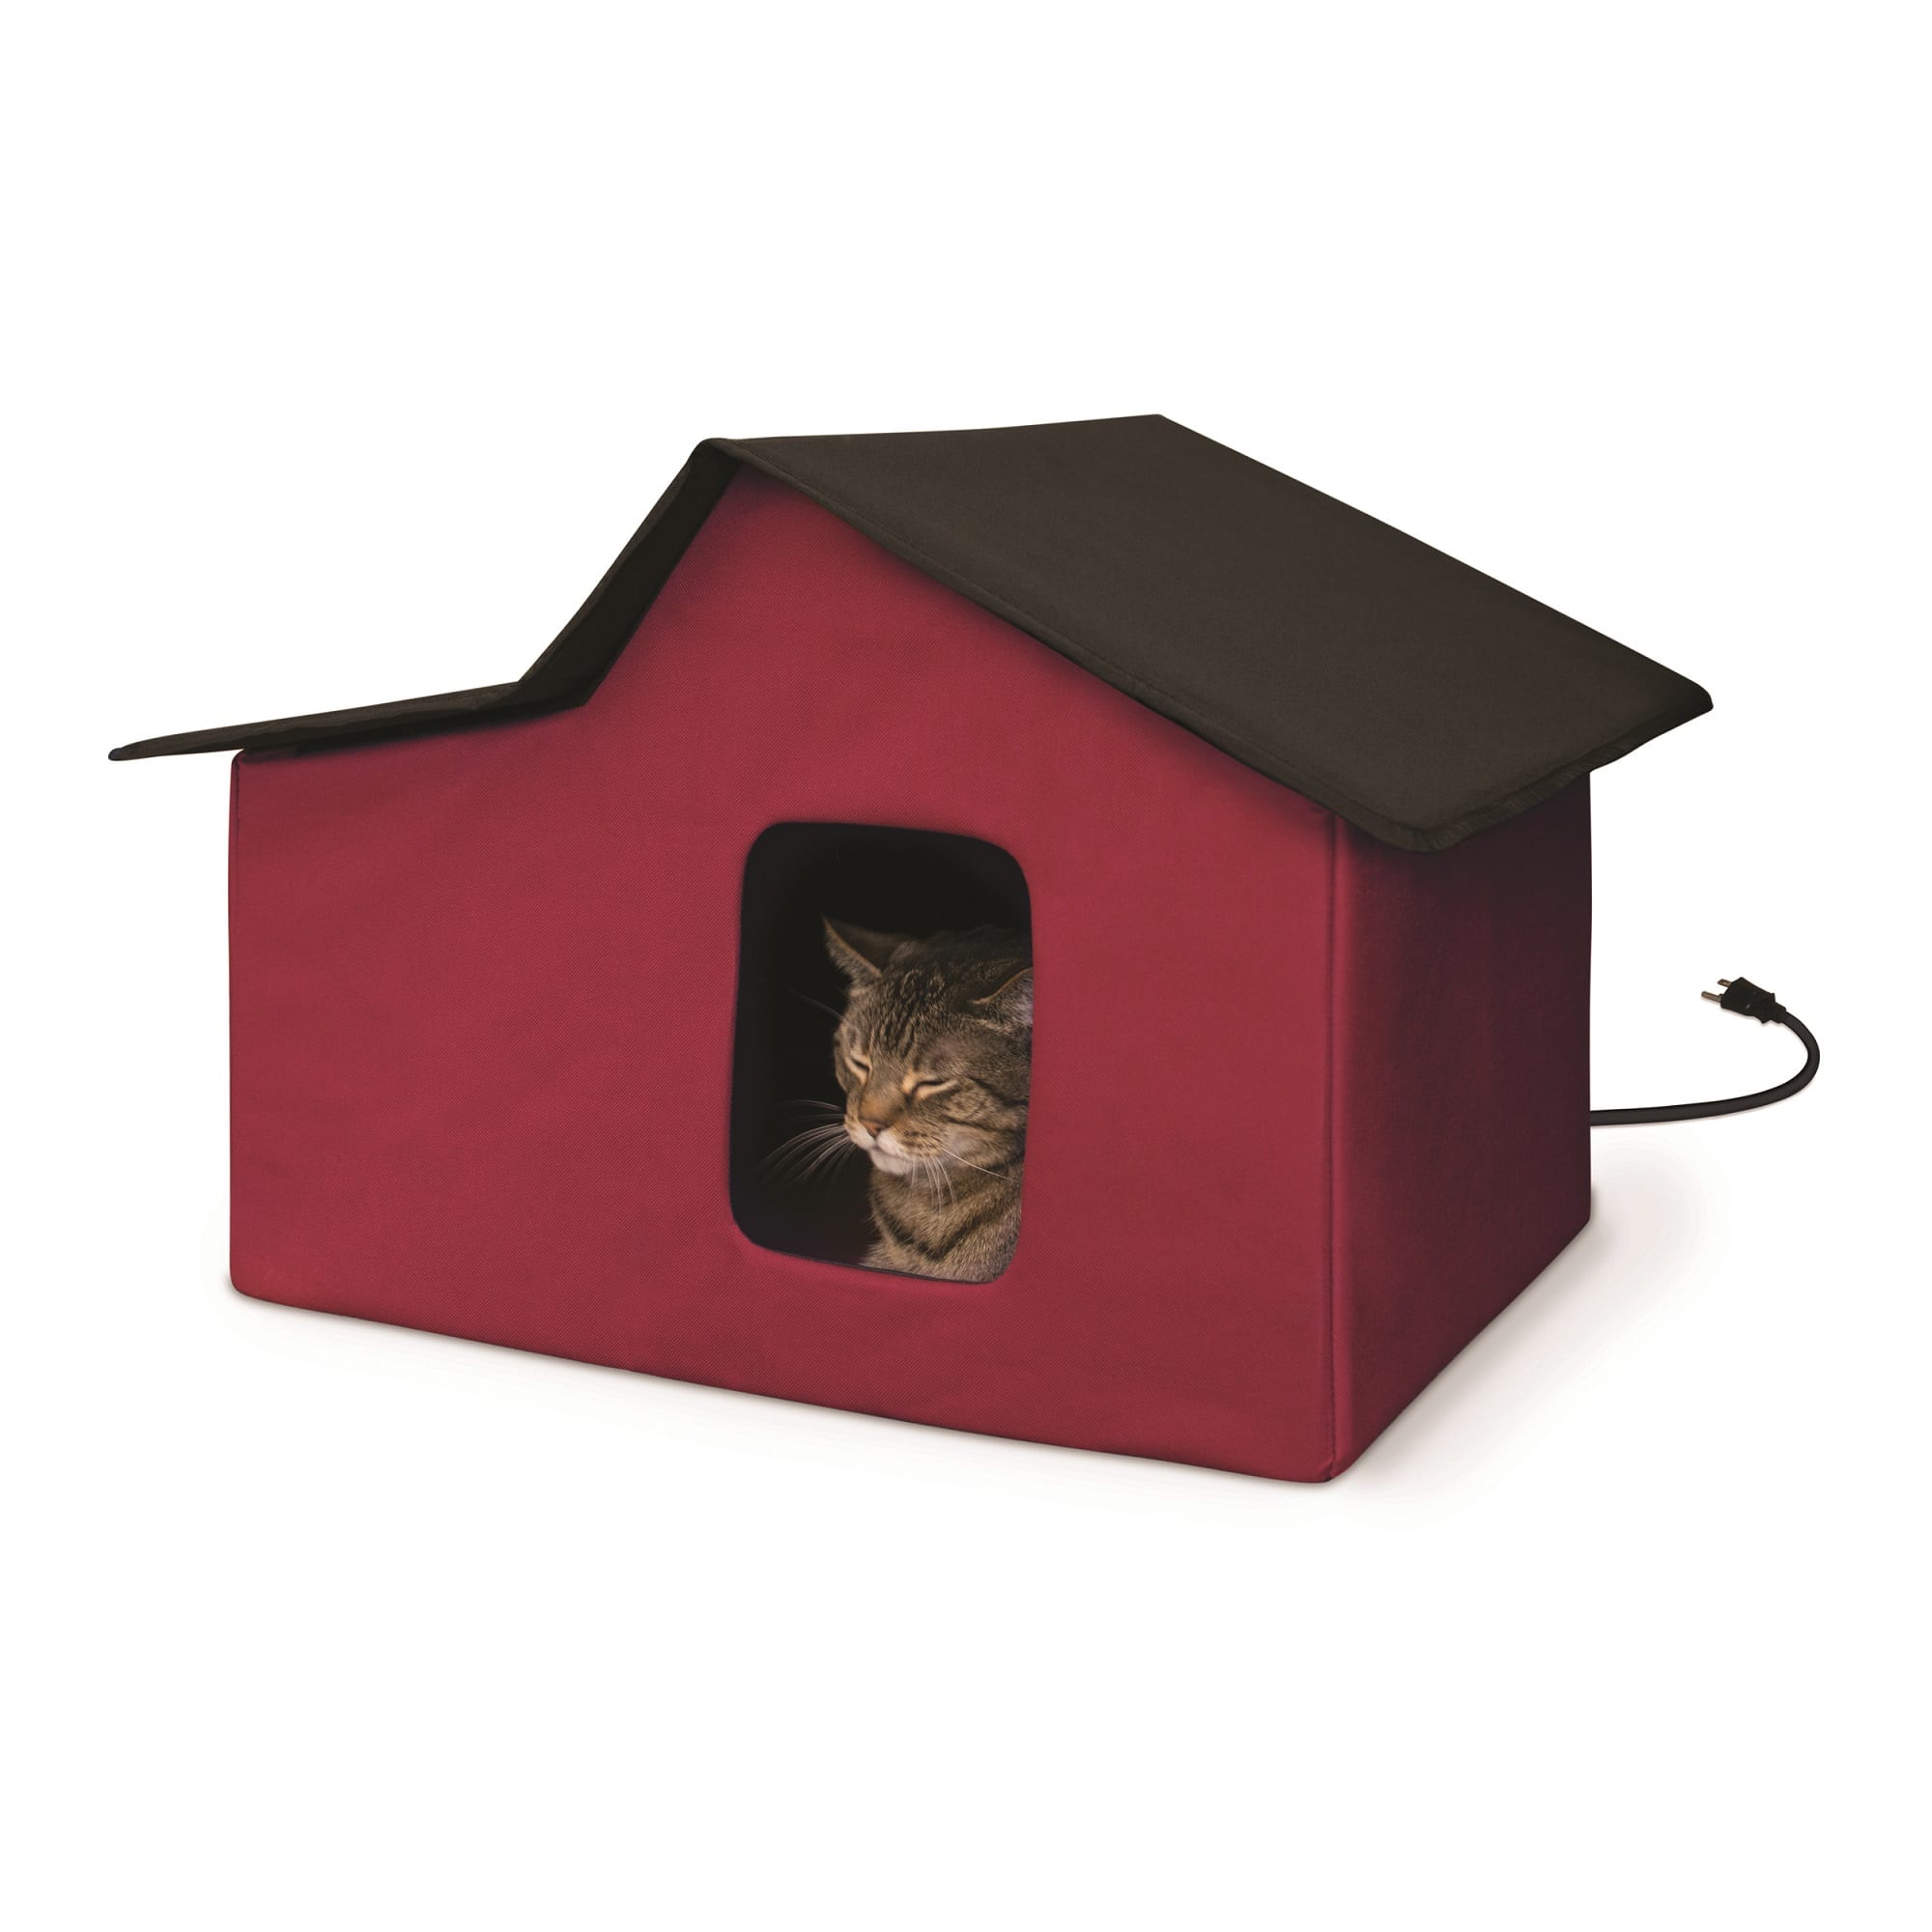 K&H Creative Solutions Red Outdoor Heated Multi Kitty Home Barn, 21.5" L X 26.5" W X 15.5" H, 21.5 IN